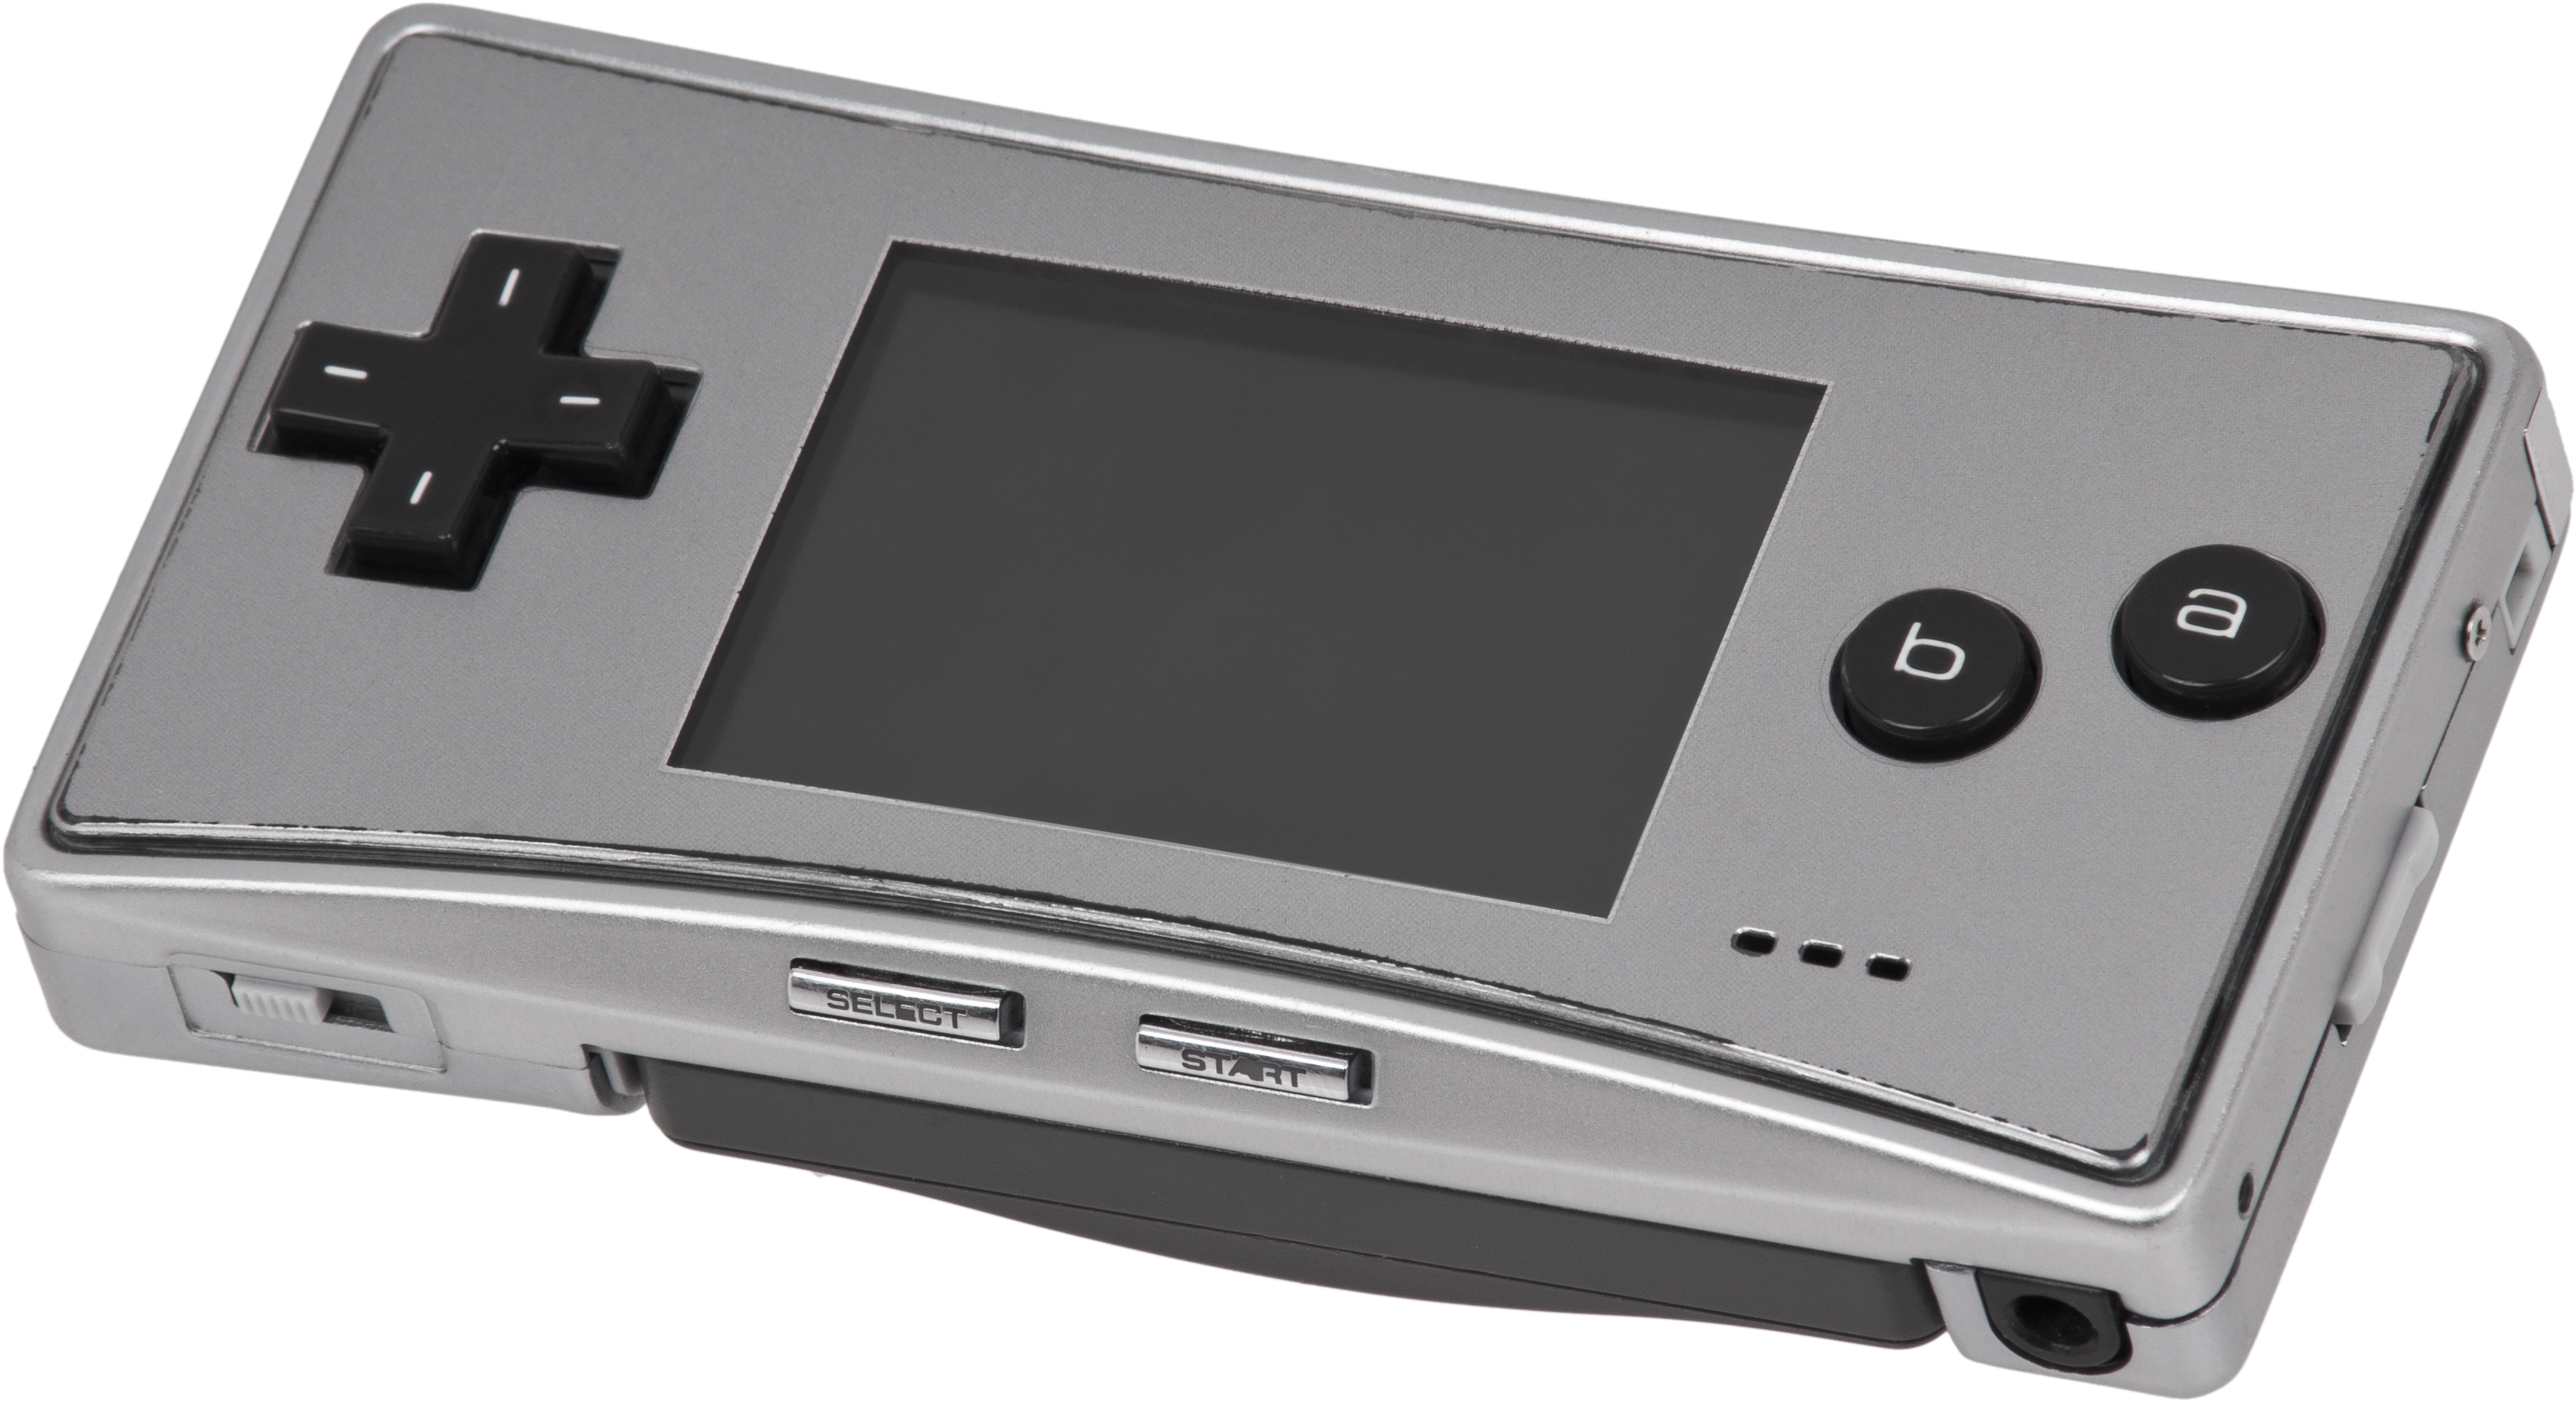 A Close-up Of A Handheld Gaming Device